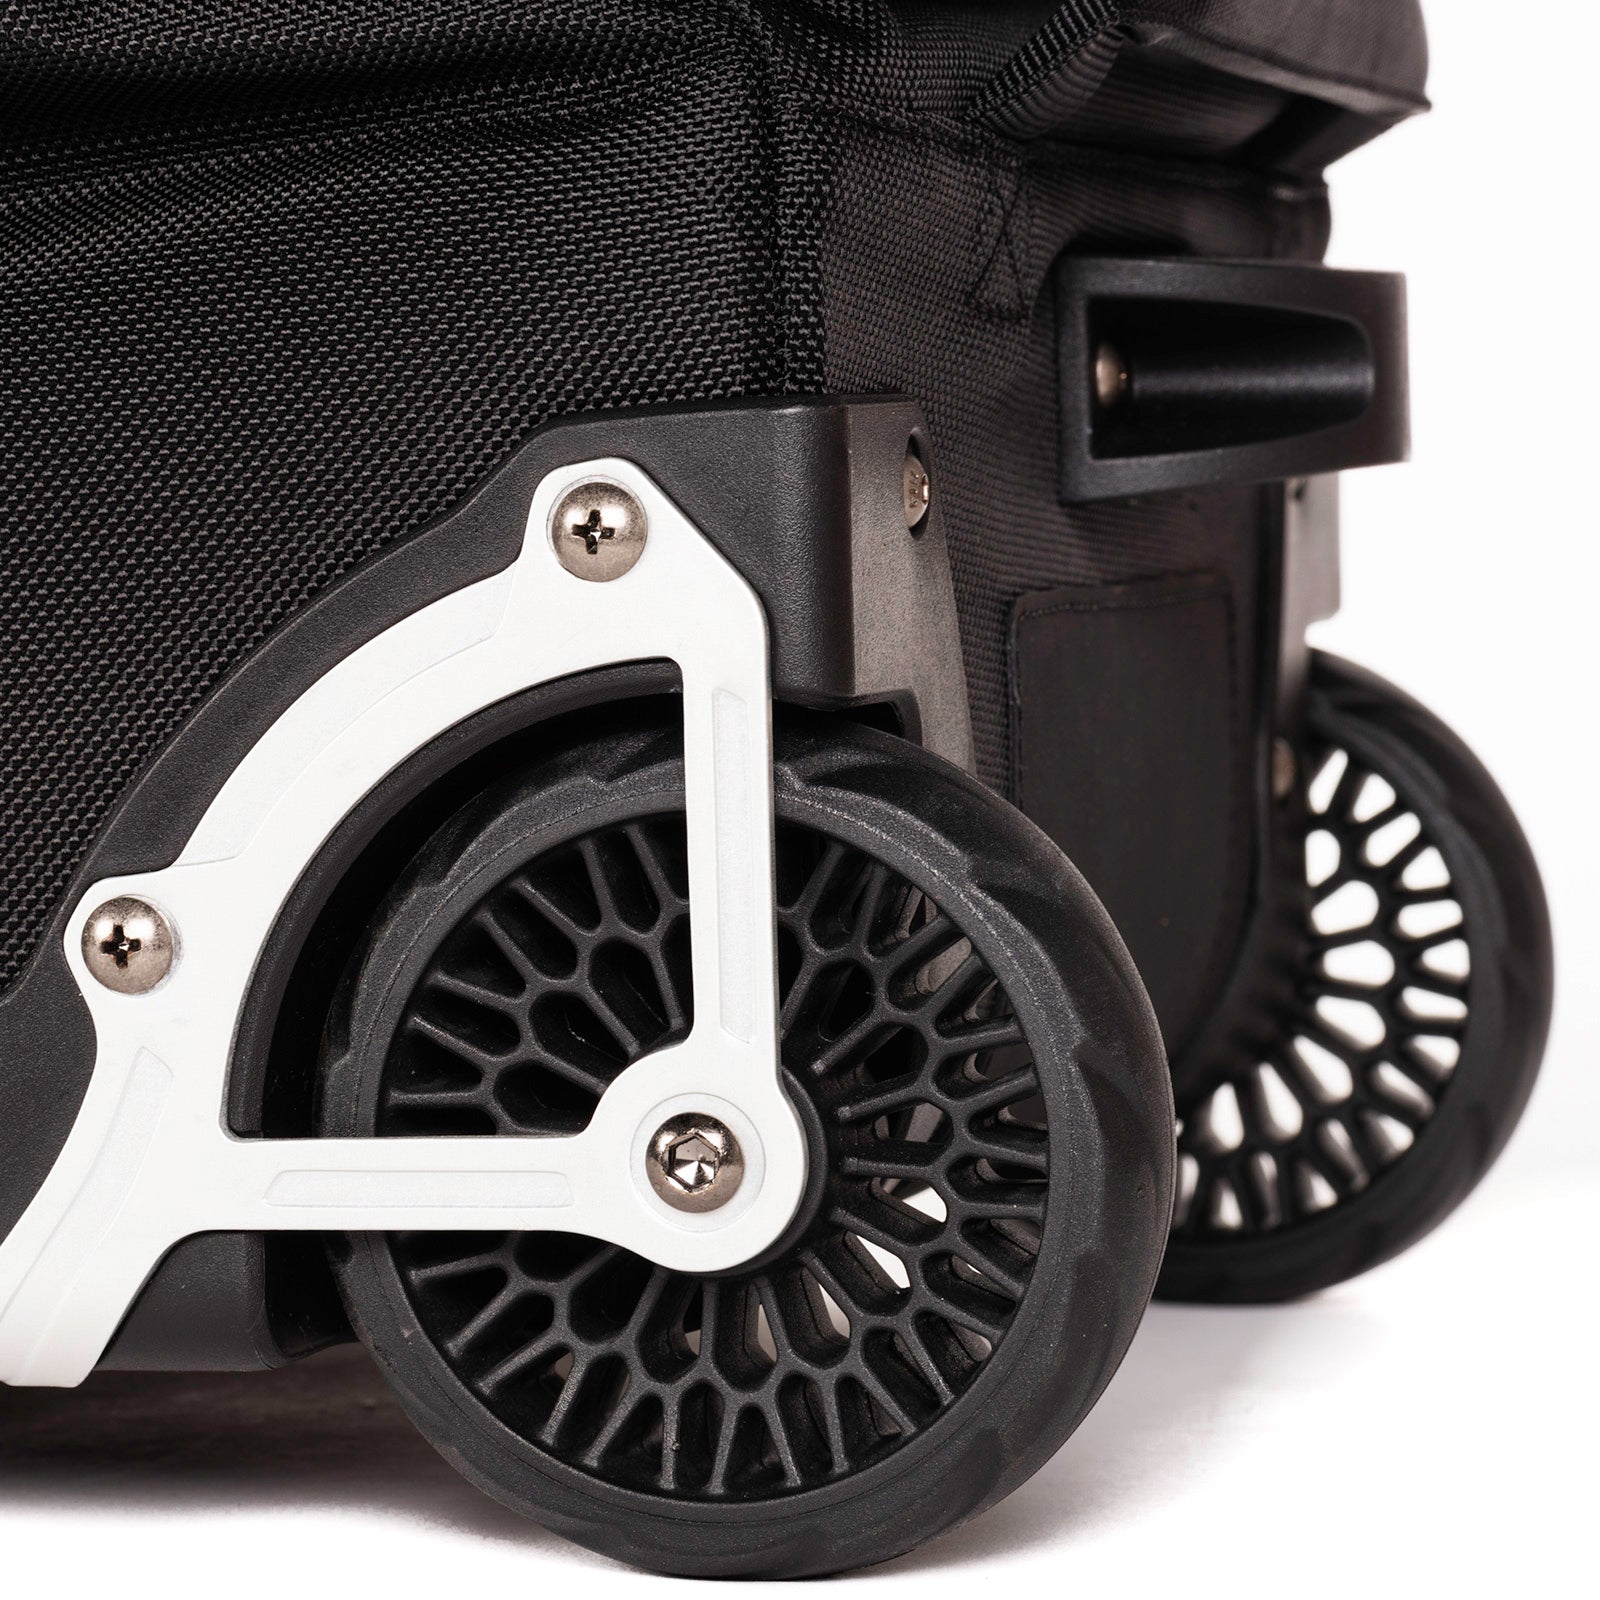 Oversized, shock-absorbing wheels roll smoothly and hold up under the toughest conditions